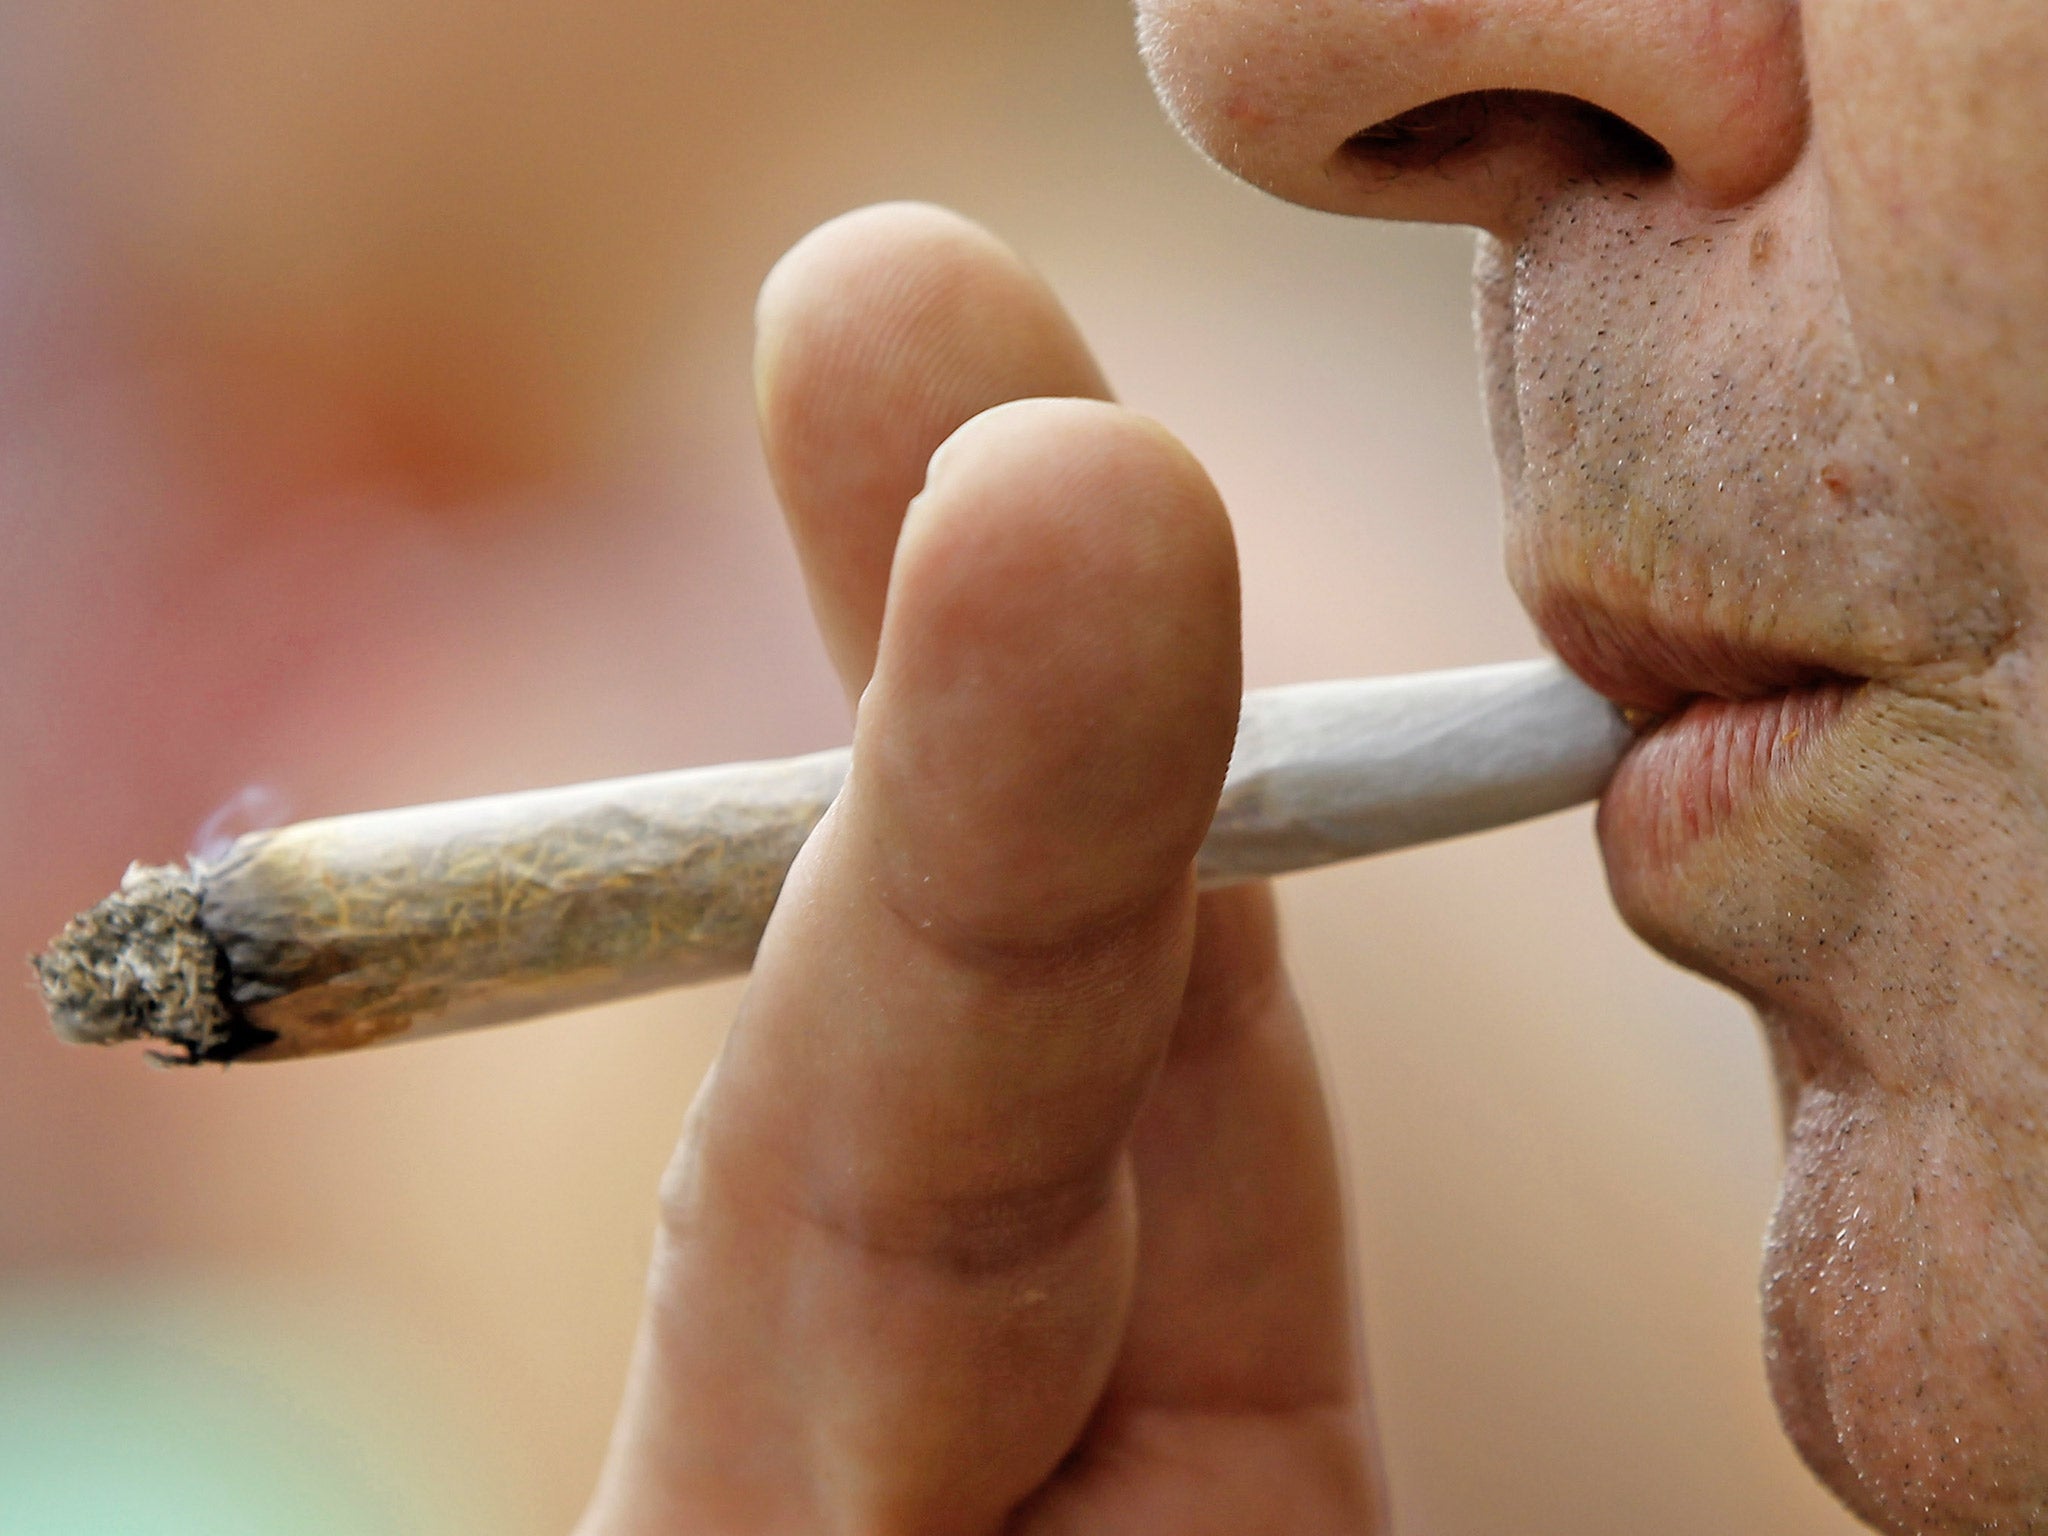 Porn during lunch breaks is OK but smoking cannabis can get you sacked,  Italy's highest court rules | The Independent | The Independent